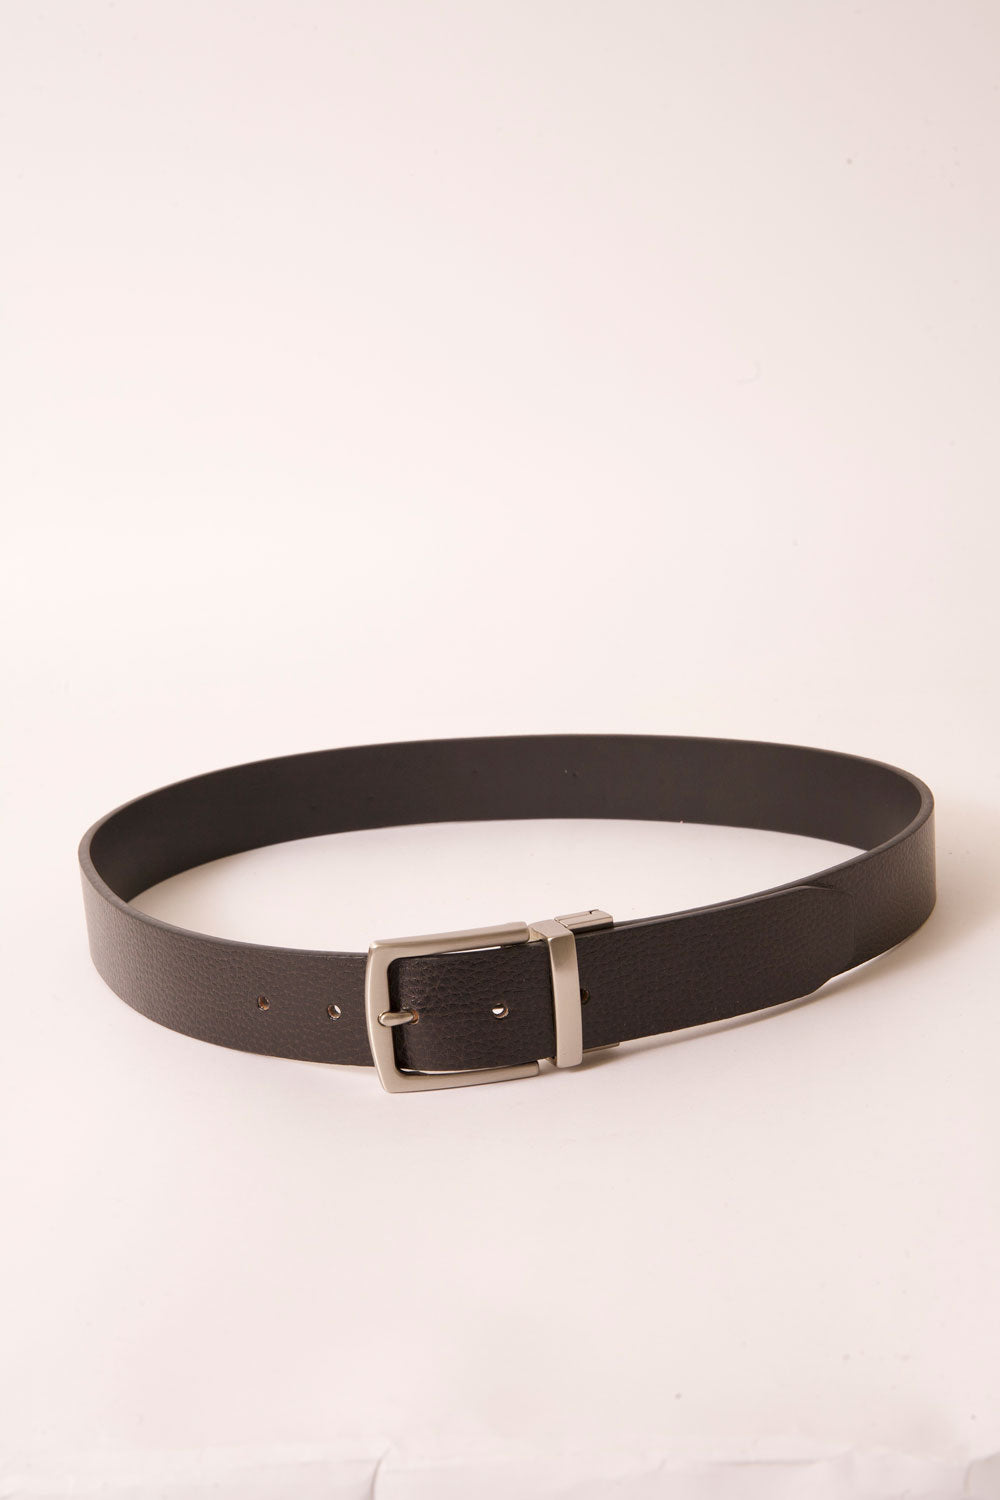 Leather Belts | Mens Hat - Leather Womens Leather American Belts Belts Makers 